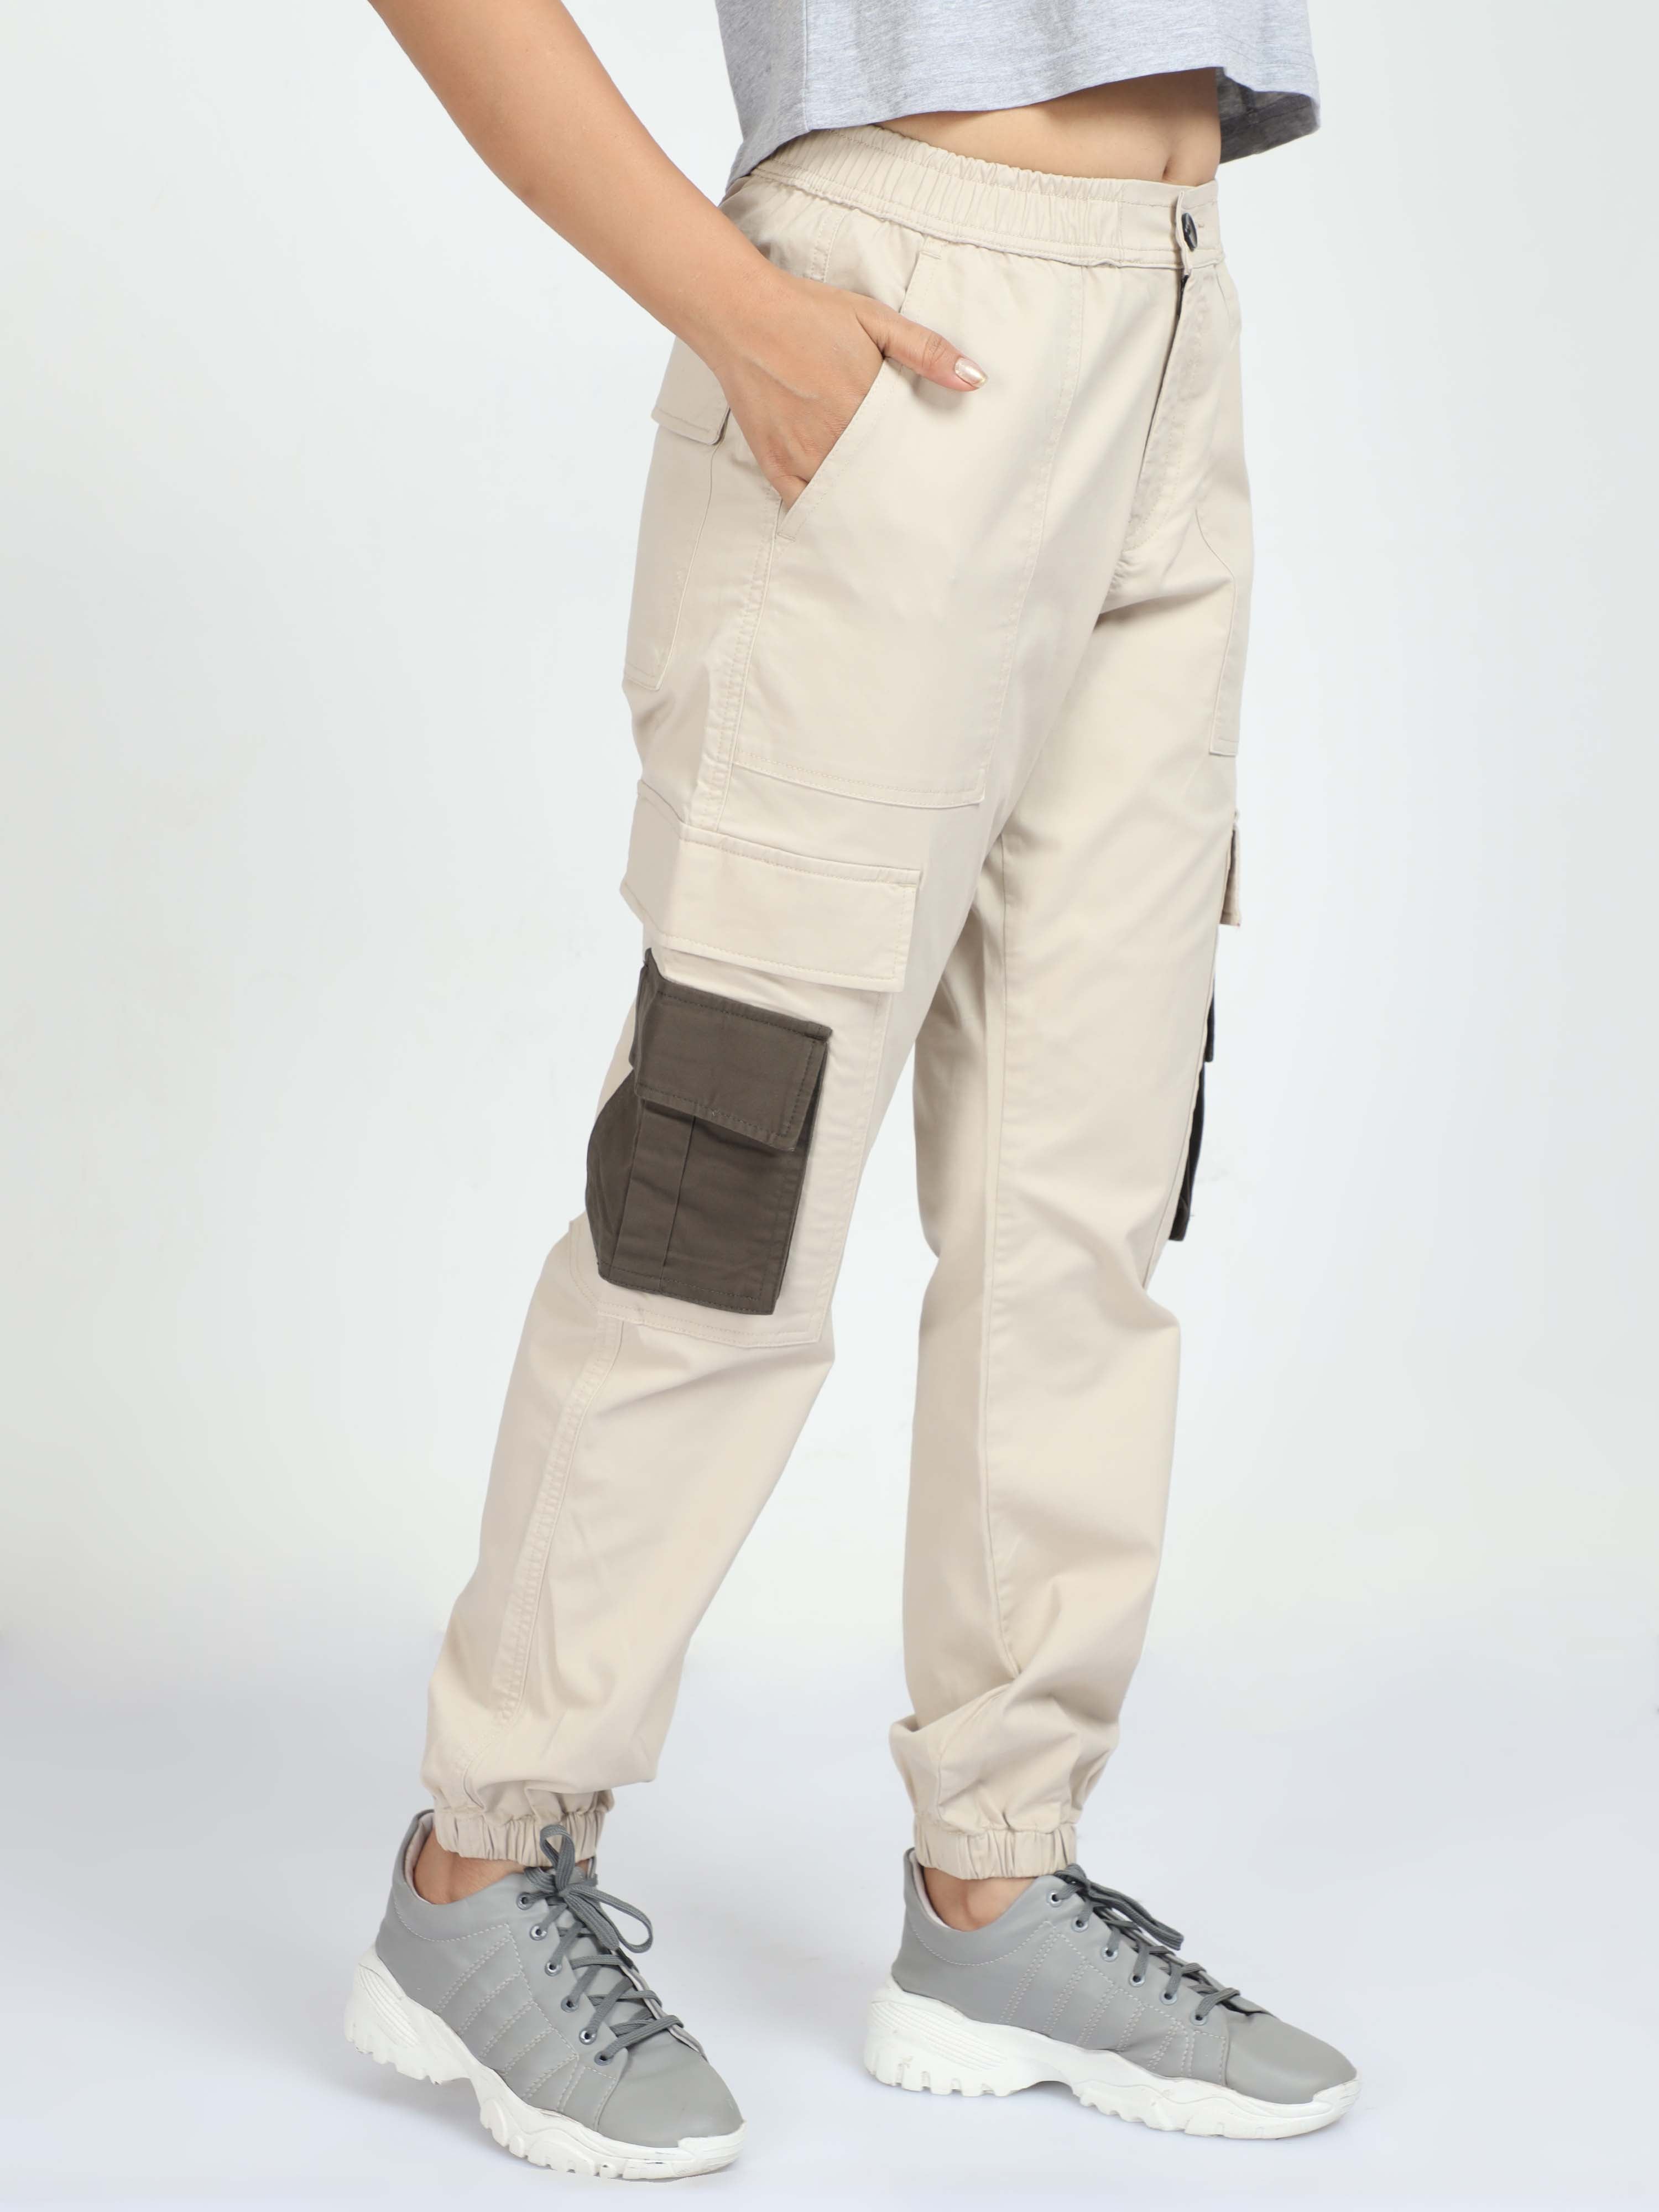 Umgee Linen Blend Pants with Side Pockets in Cream – June Adel